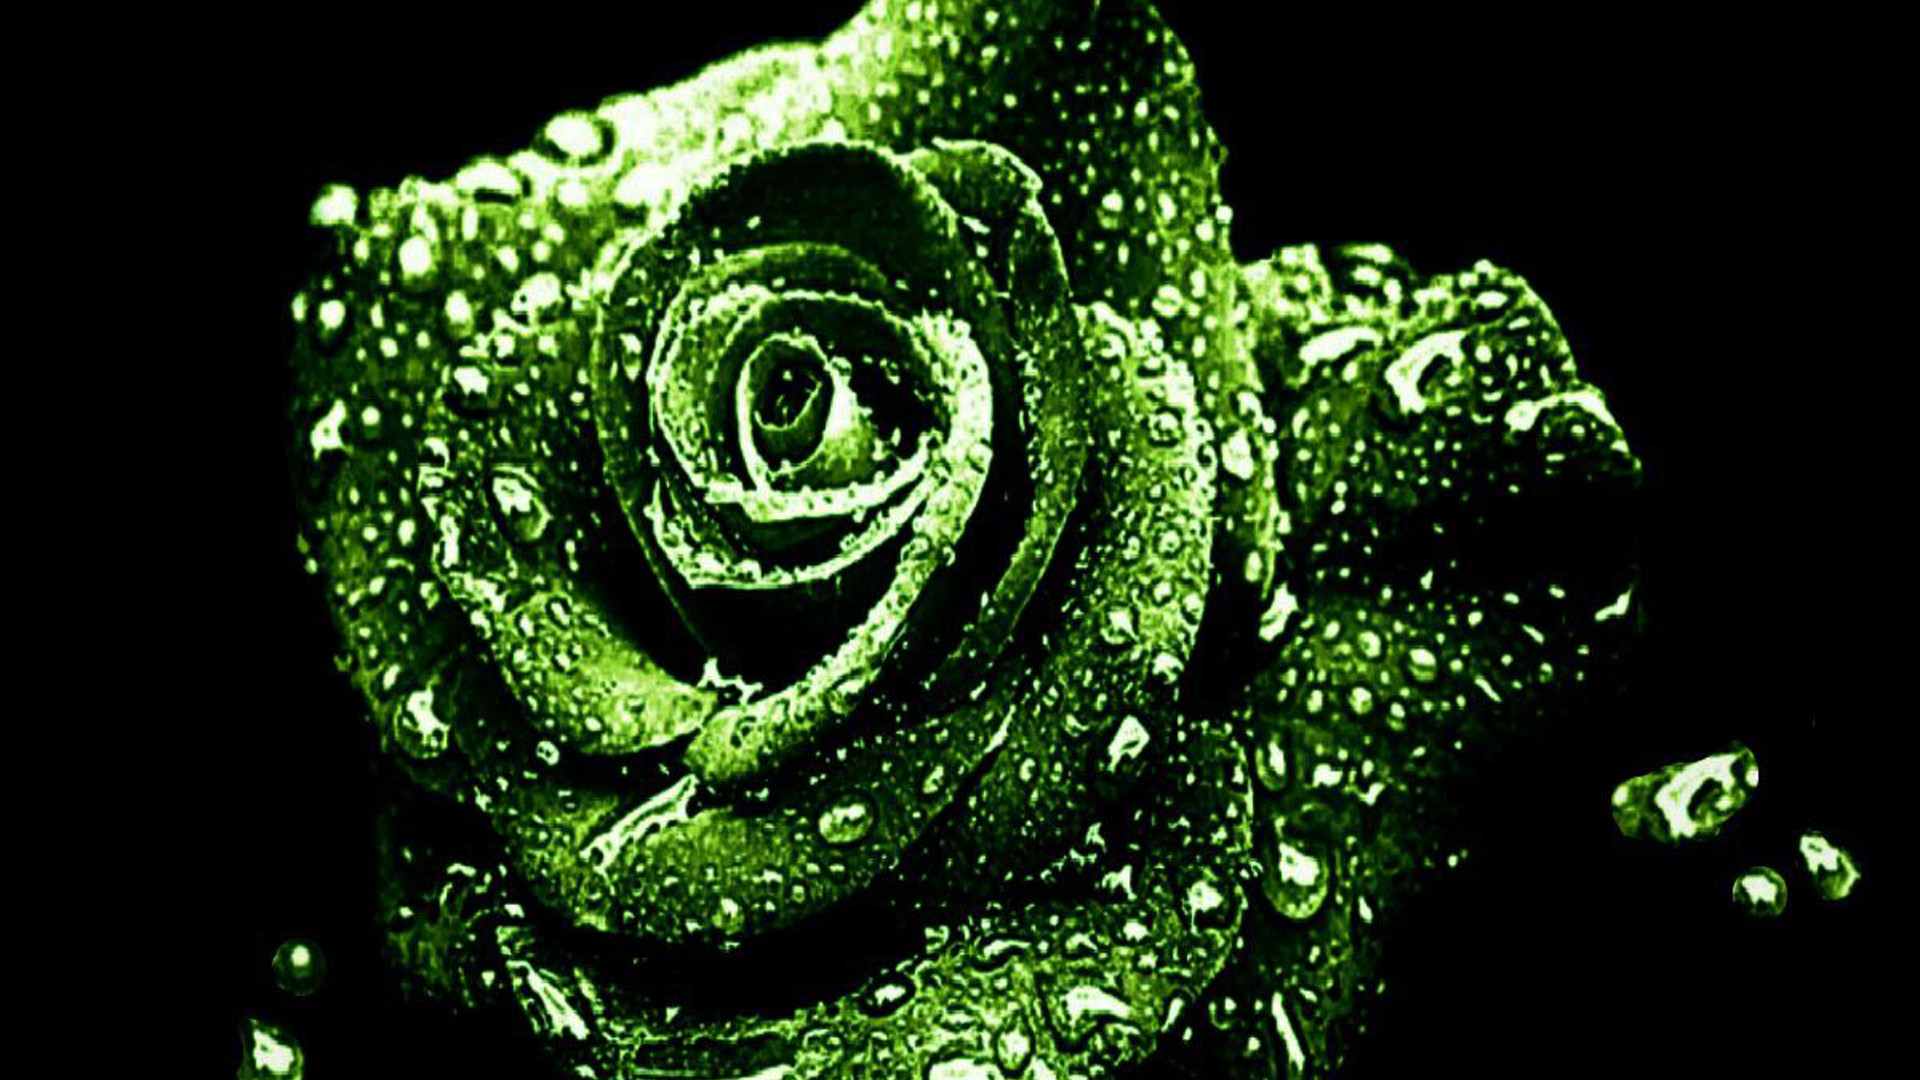 1920x1080 Dark Green Roses Wallpapers, Rose Flower Images, Rose Pictures And ..